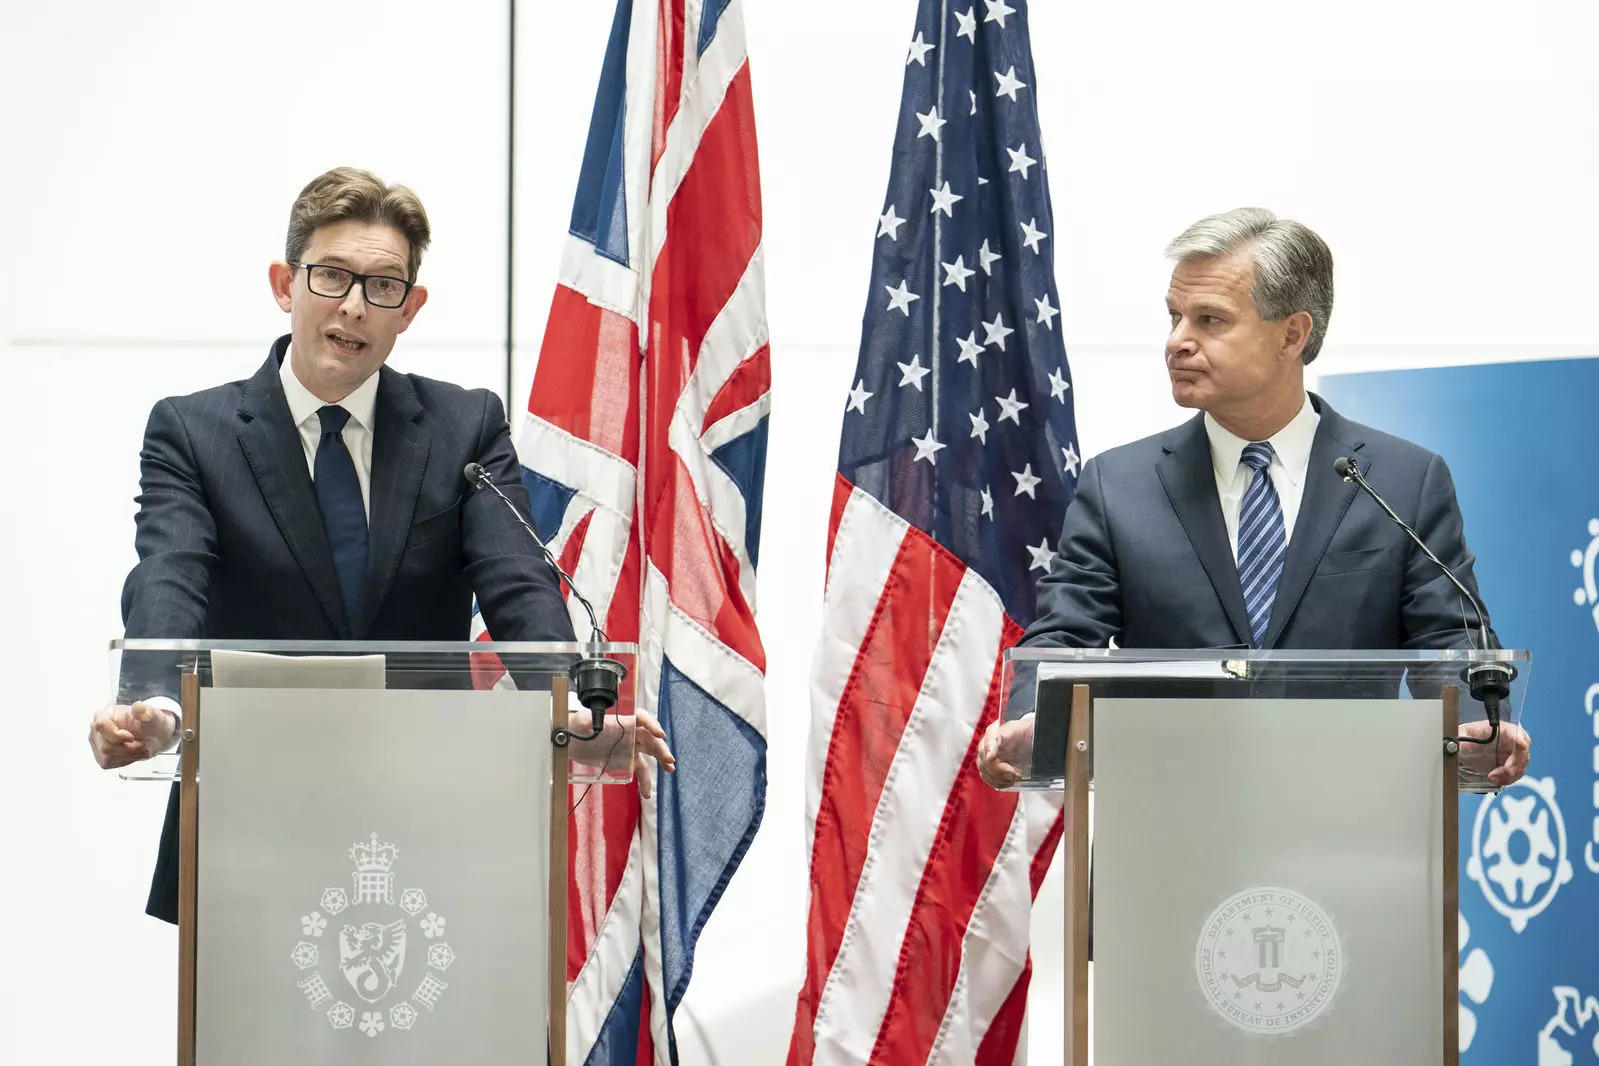 MI5 director general Ken McCallum, left, and FBI director Christopher Wray attend a joint press conference at MI5 headquarters, in central London.